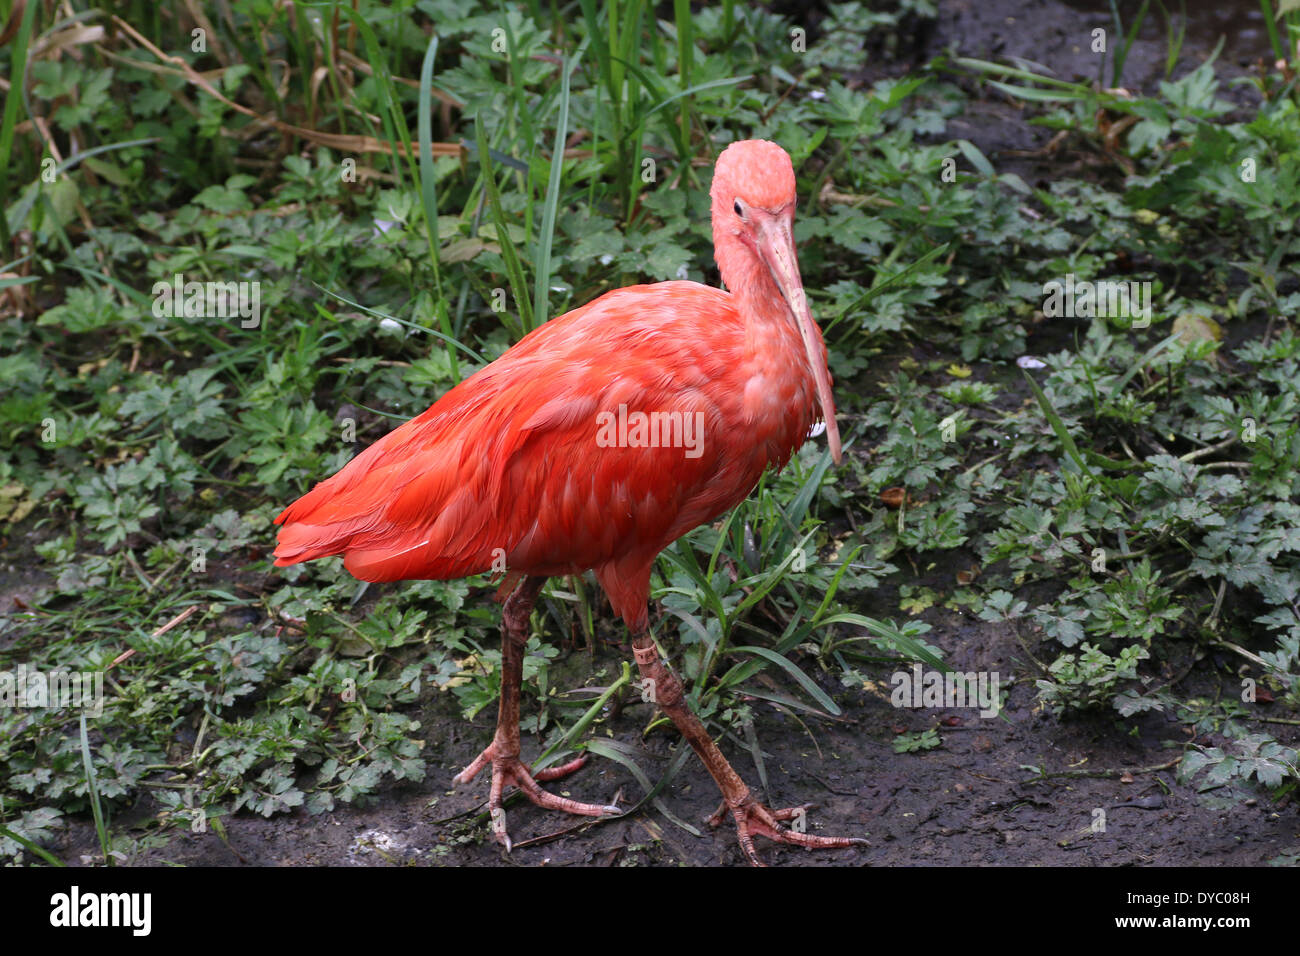 Close-up of a South American Scarlet Ibis (Eudocimus ruber) walking at water's edge Stock Photo